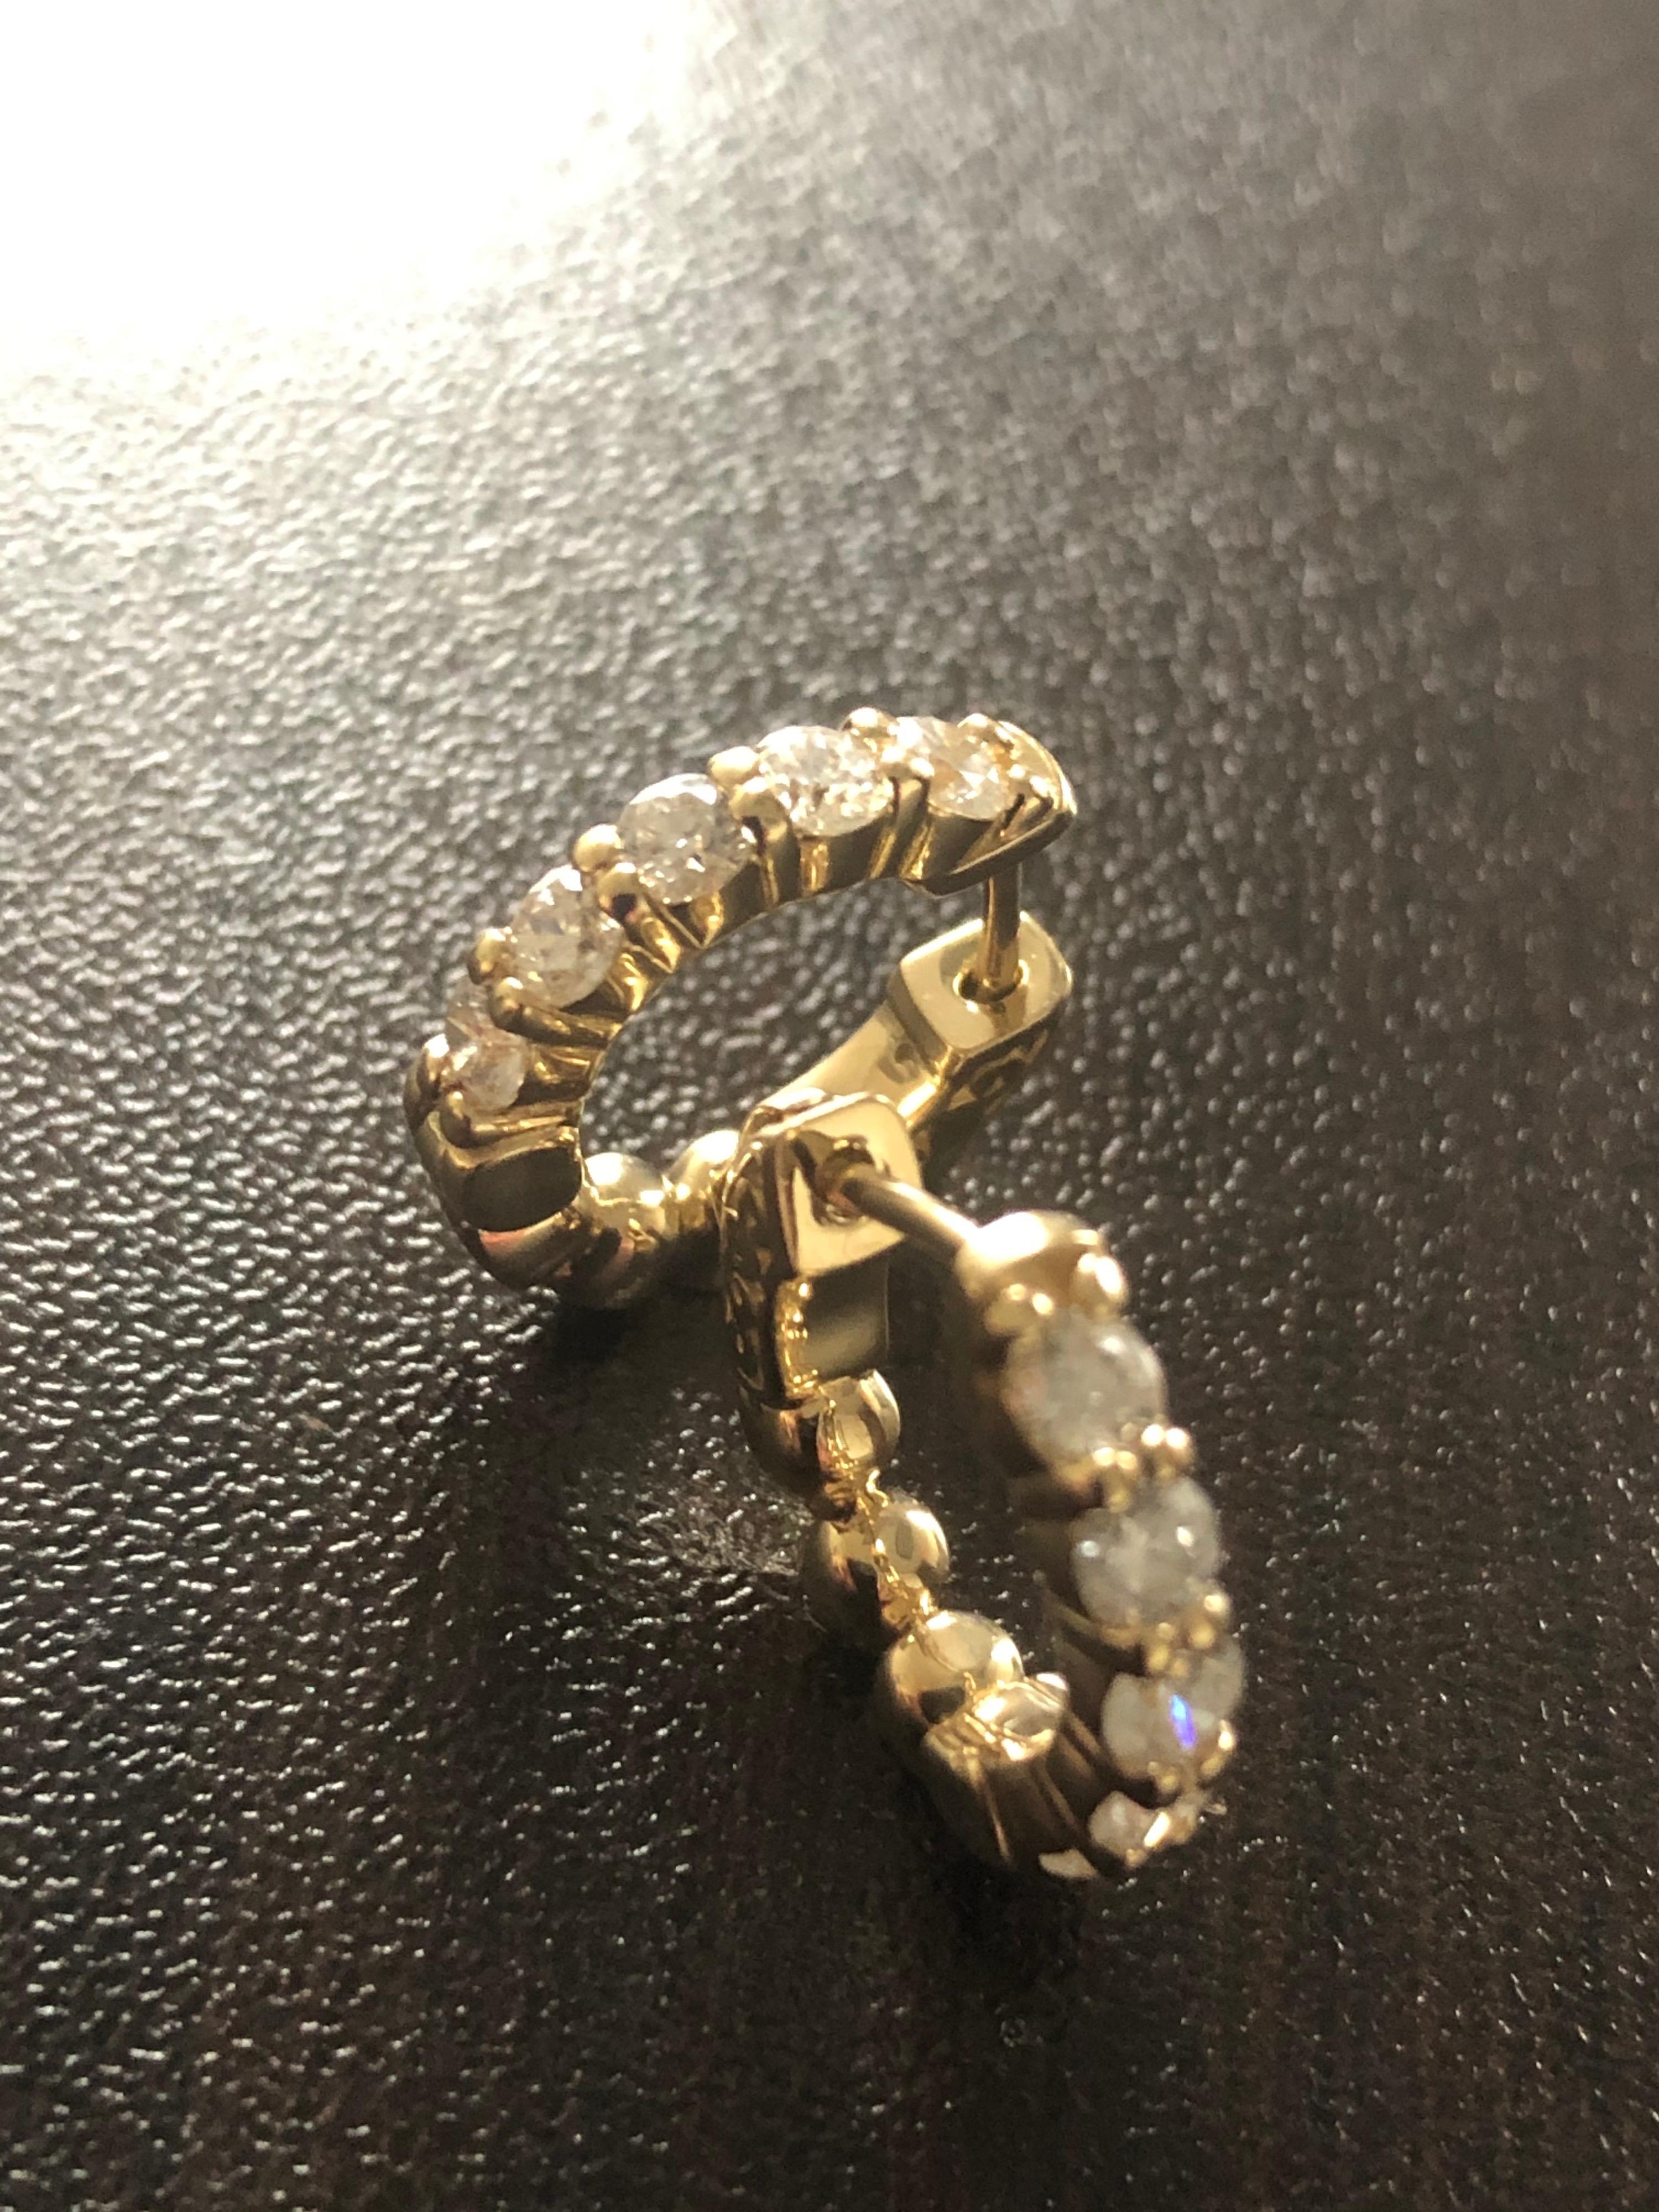 Diamond huggies set in 14K yellow gold. The total weight of the huggies hoop is 1 carat exact. The earrings are set with 10 stones on the outside each weighing 0.10 carats. The color of the stones are G, the clarity is SI1. Huggies are available in